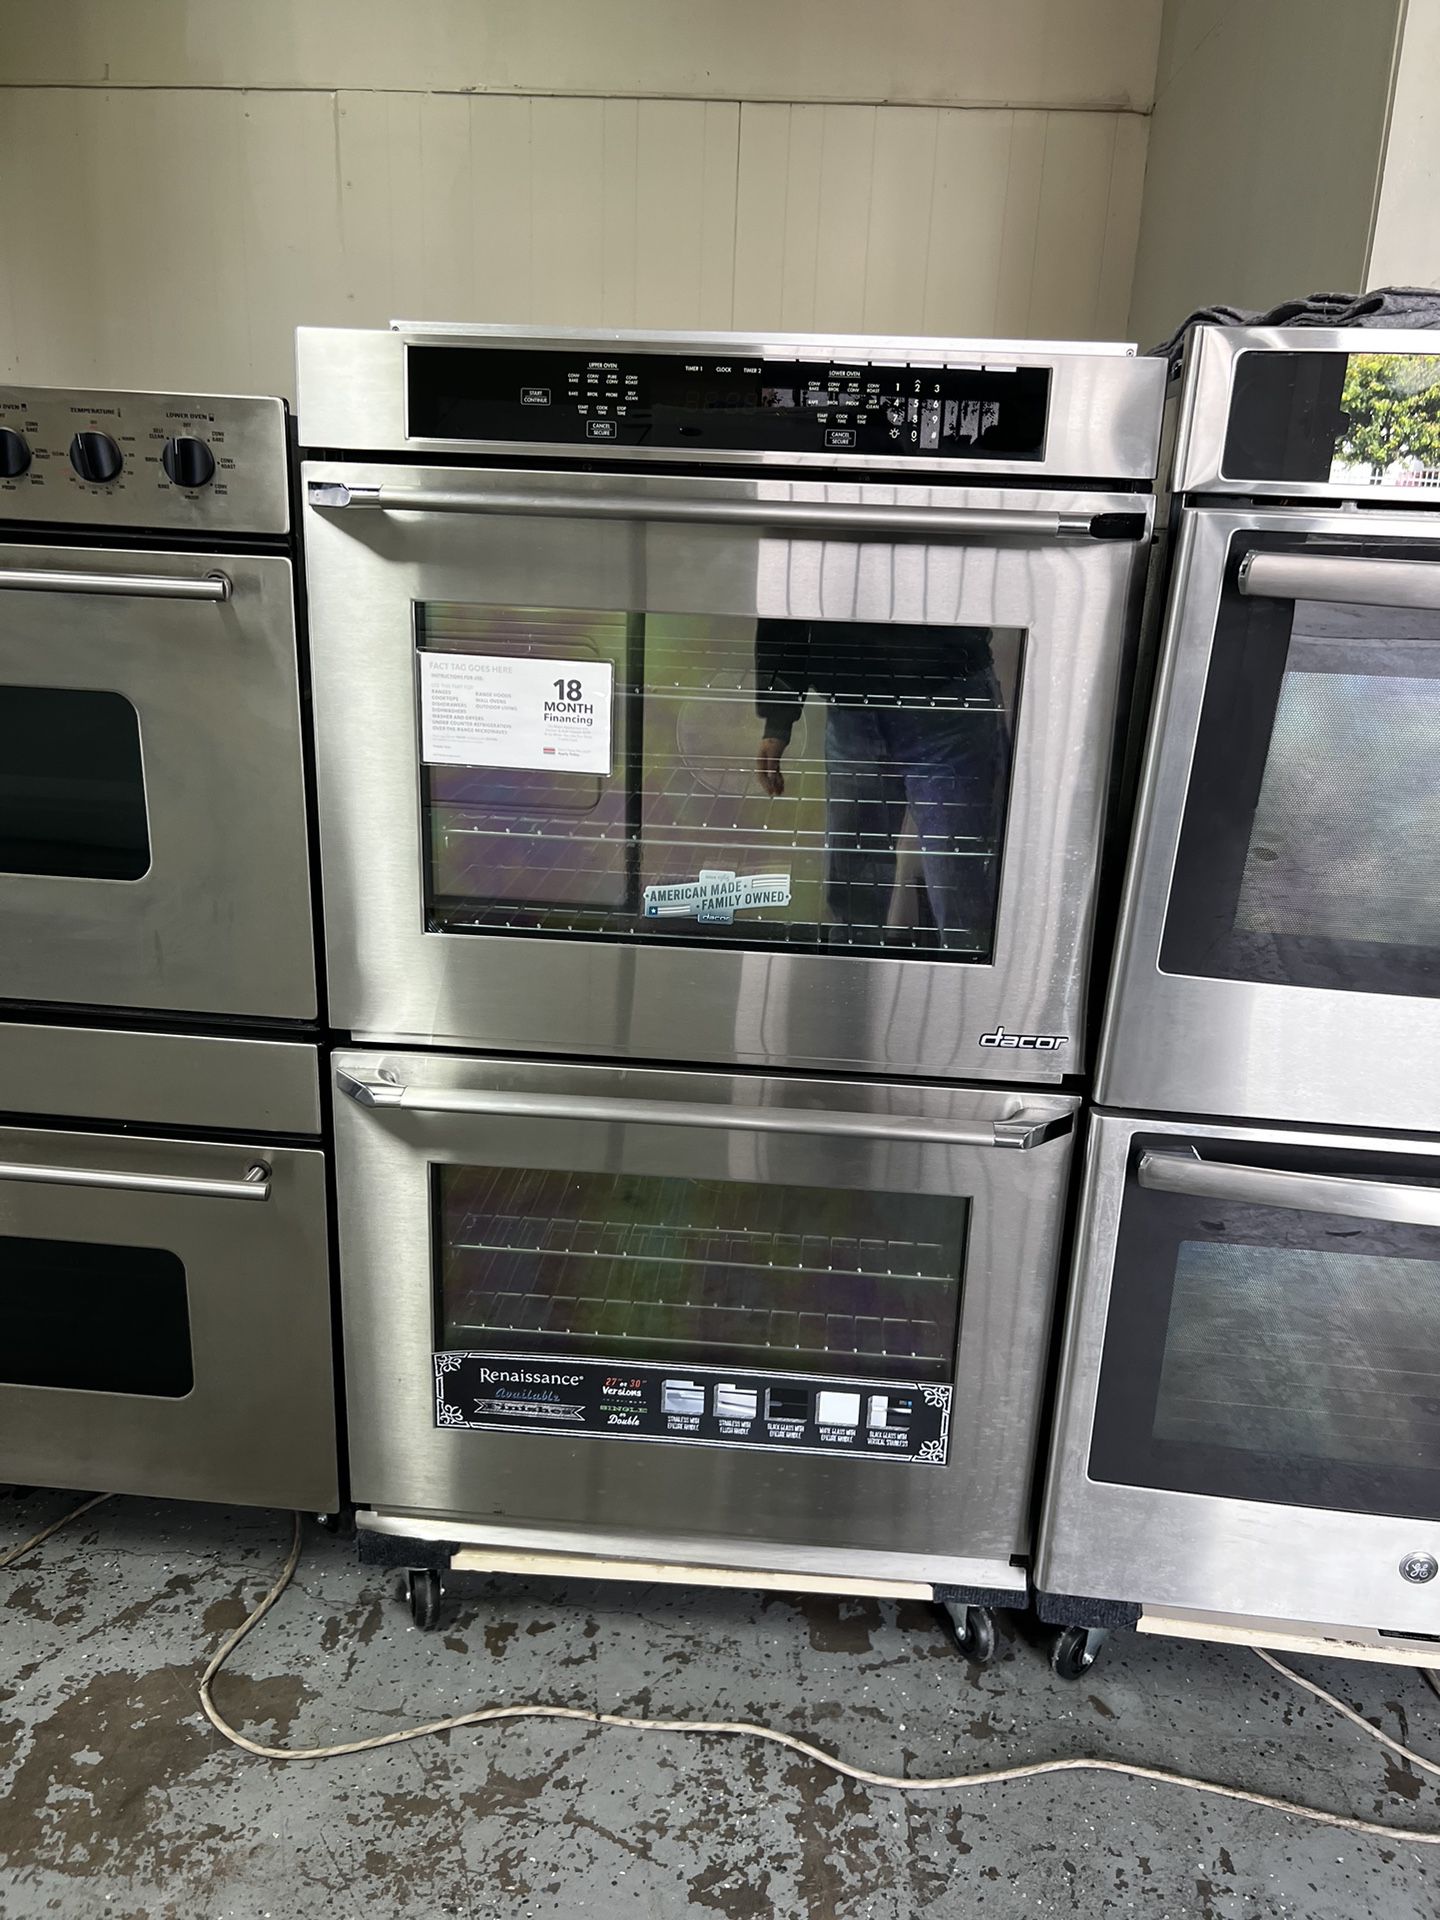 Dacor 30”Wide Stainless Steel Double Wall Oven New Open Box 